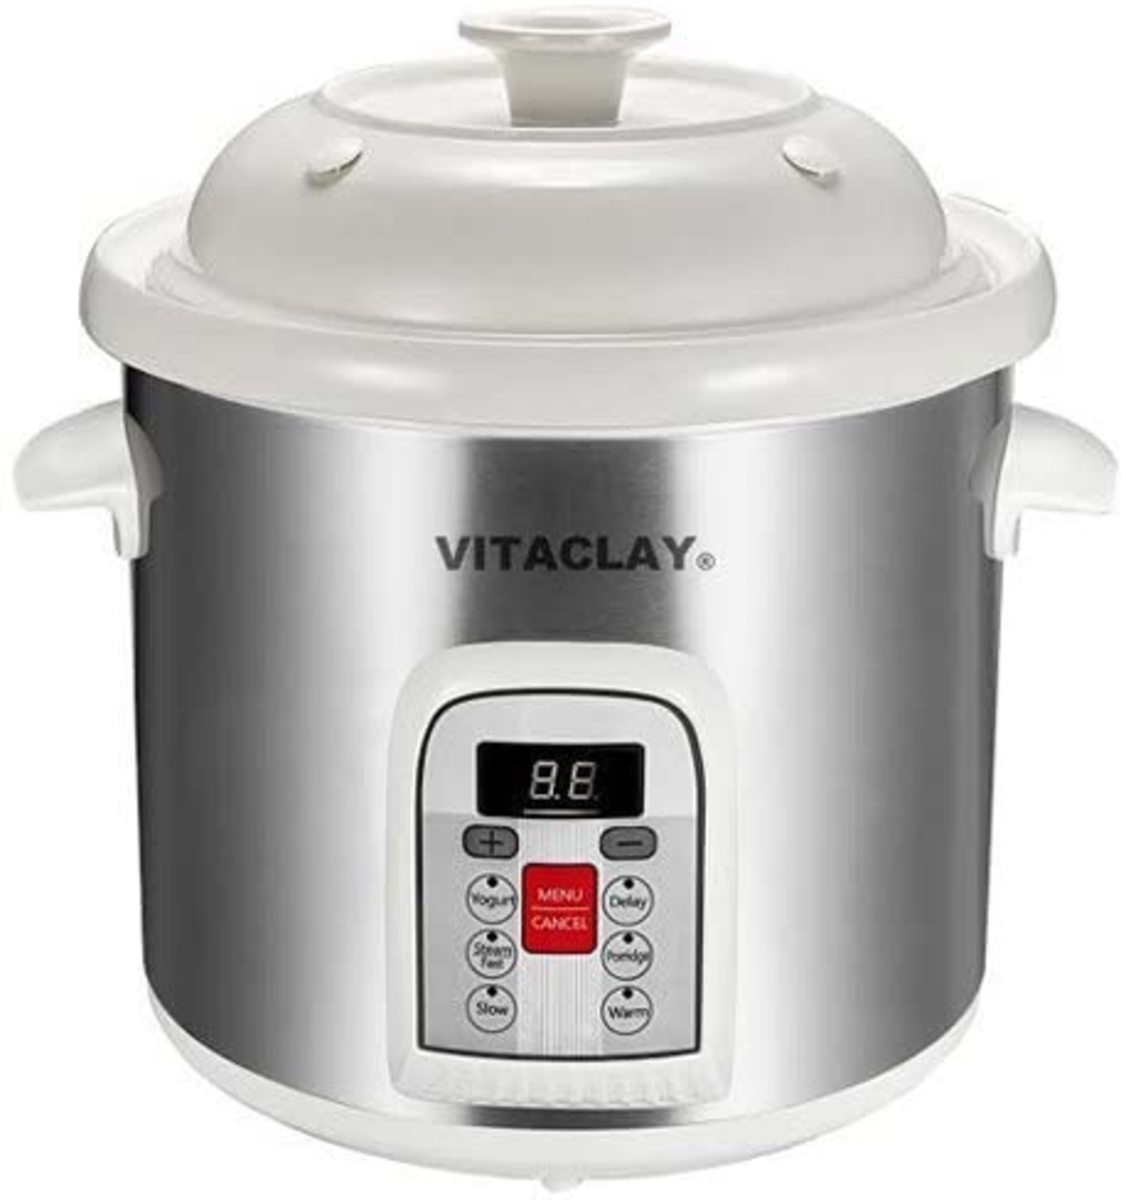 the-best-lead-free-slow-cookers-and-crock-pots-for-the-kitchen